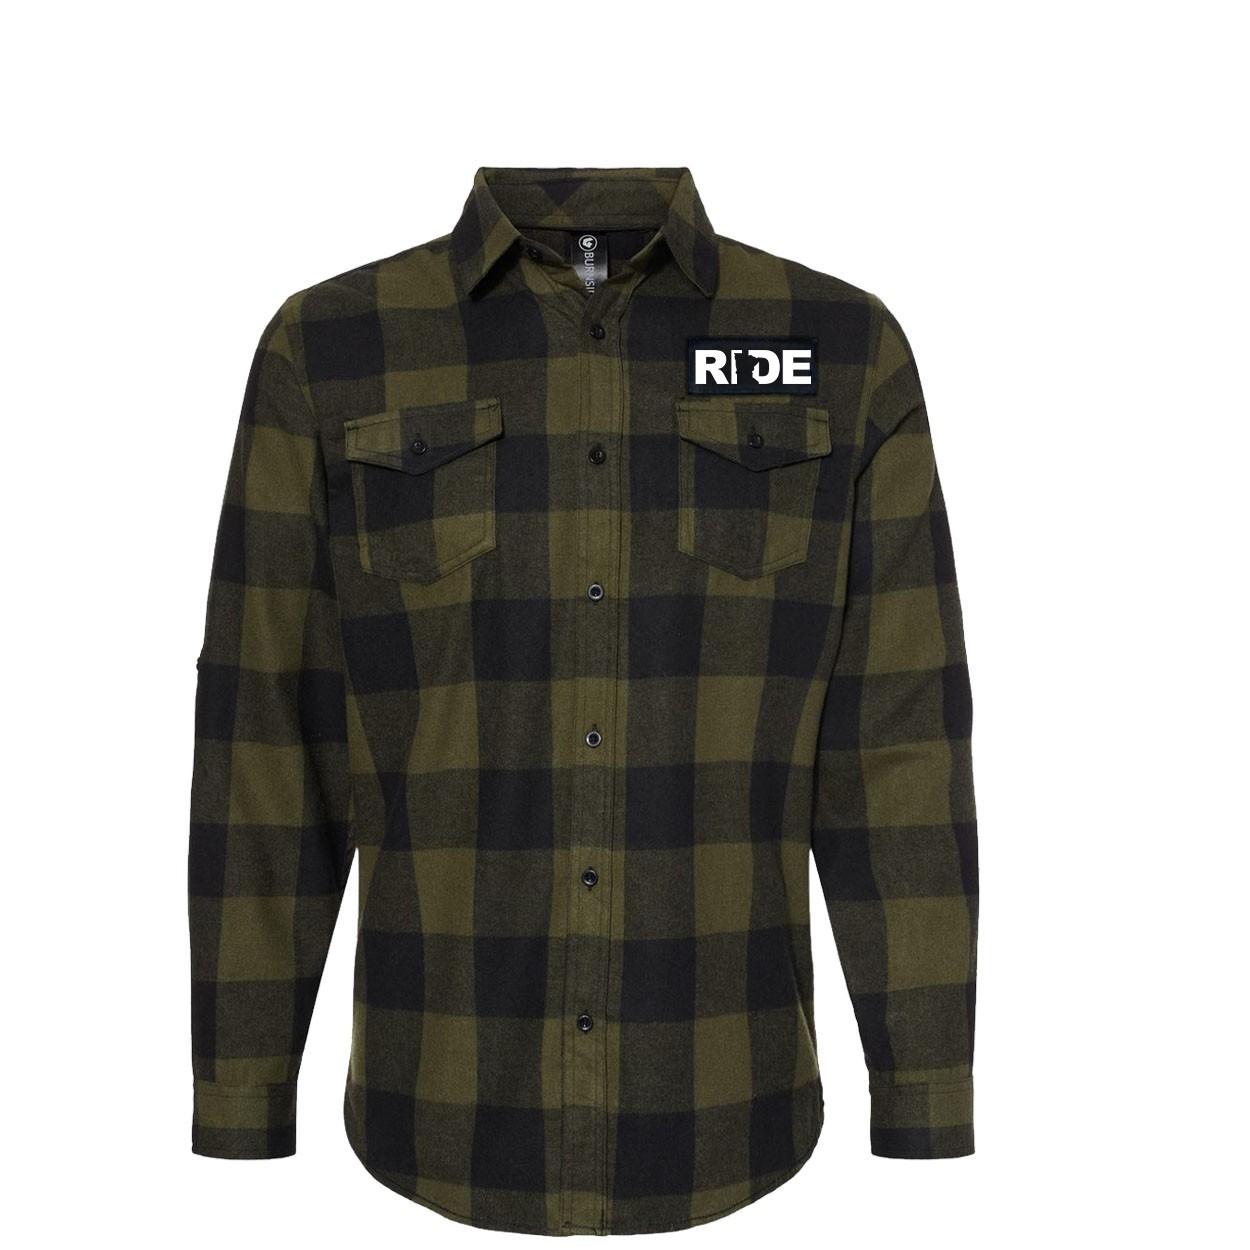 Ride Minnesota Classic Unisex Long Sleeve Woven Patch Flannel Shirt Army/Black (White Logo)